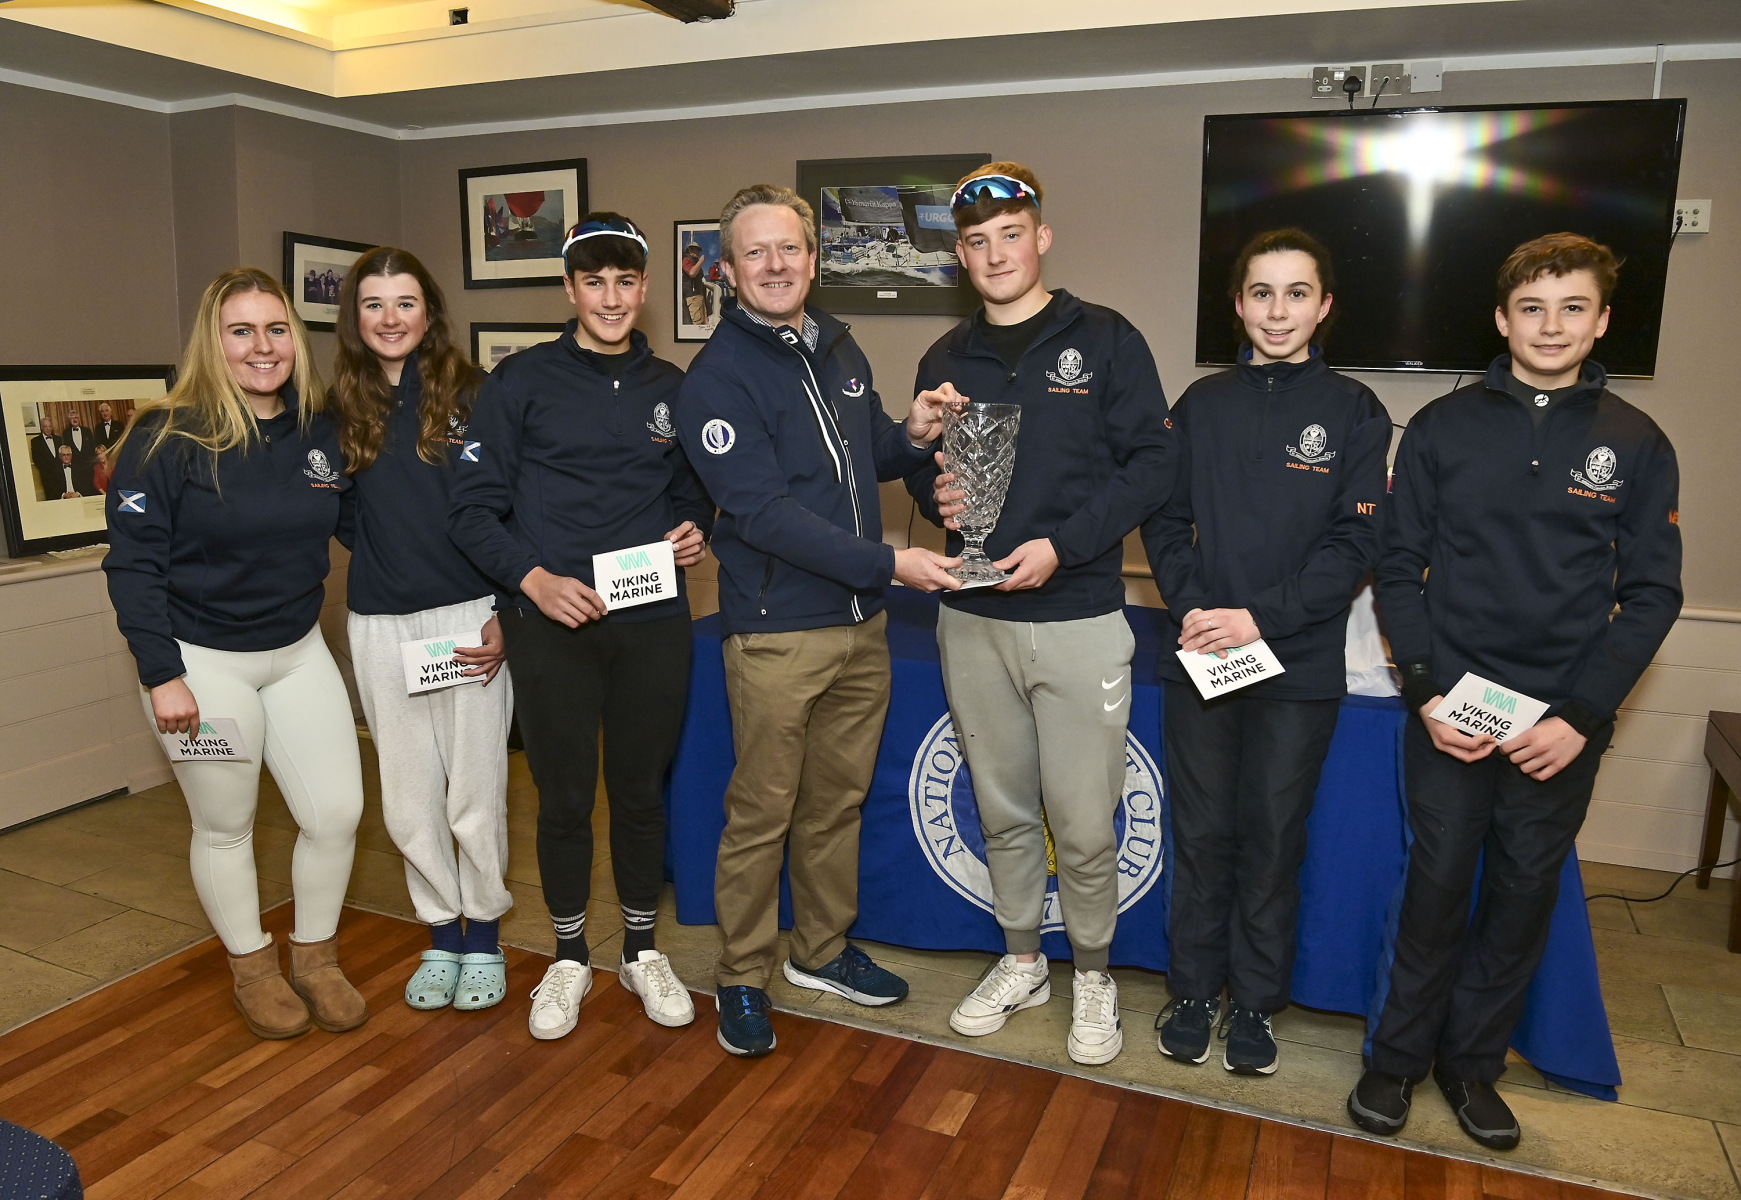 First Place St Andrews (1) ONE  ,Commodore NYC Conor O’Regan, with Caoilinn Geraghty McDonnell - Ruby Style O’Connell, Oisin Hughes - Nora Tinny - Sam Ledoux - Matvey Sorgassi 

“The Leinster Schools Team Racing Championships 2023 sponsored by Viking Marine”
****NO Reproduction Fee ******
Pic © Michael Chester
0878072295
info@chester.ie